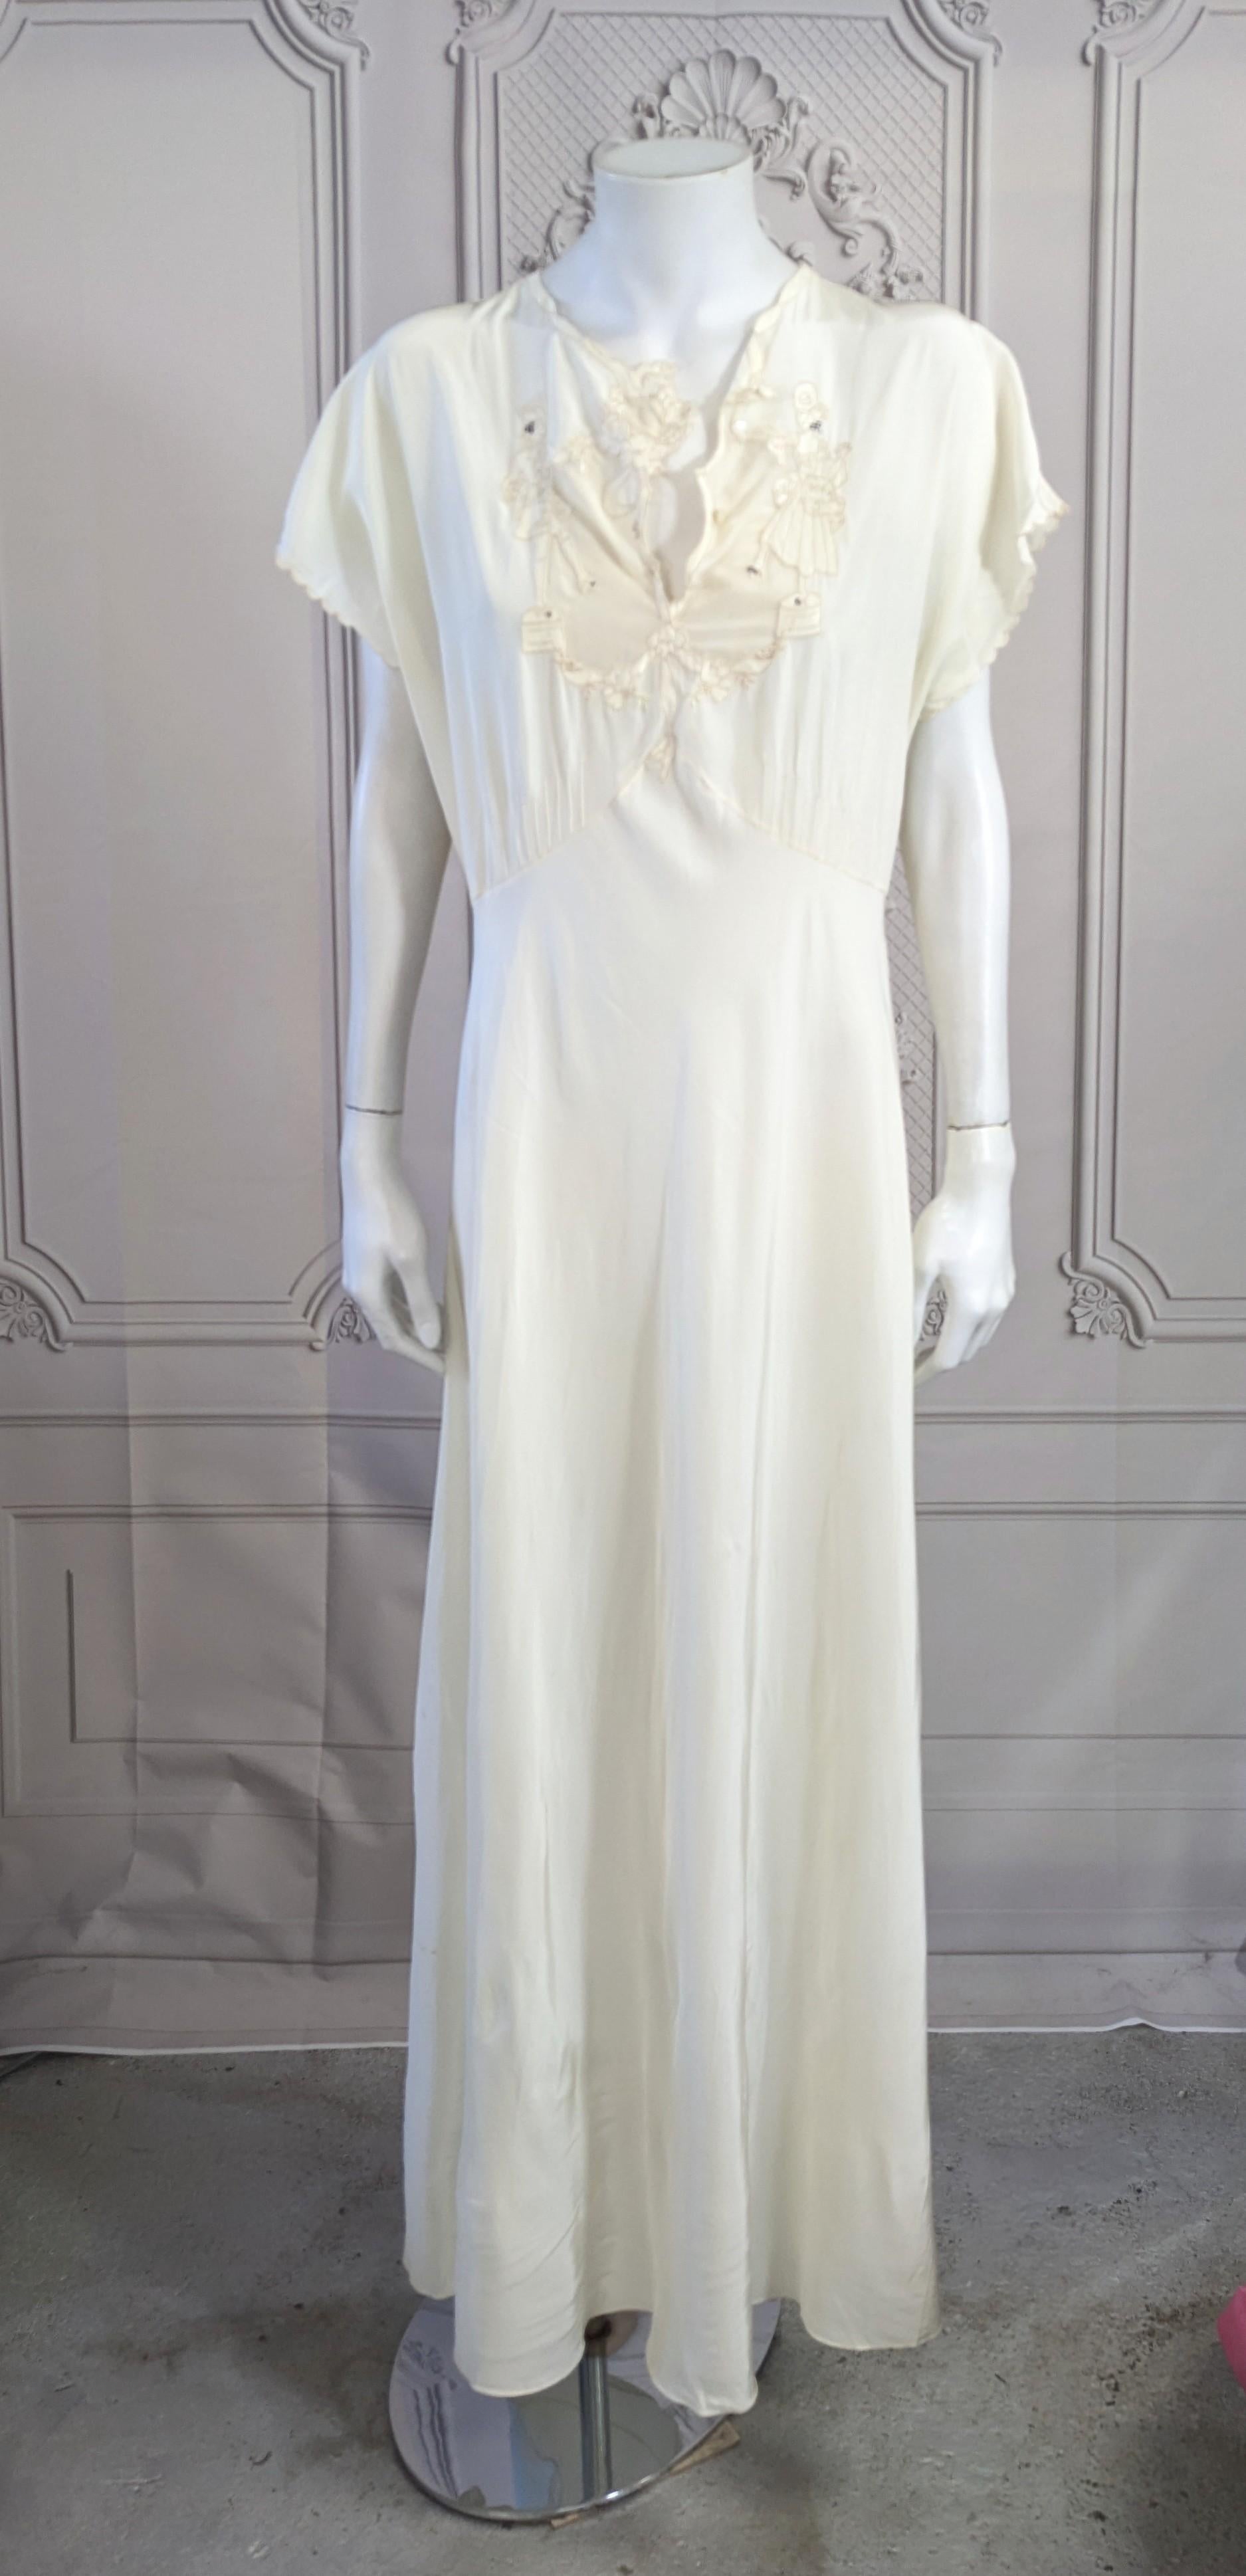 Charming Ivory Slip Dress, 18th Century Courtesan Embroideries For Sale 3